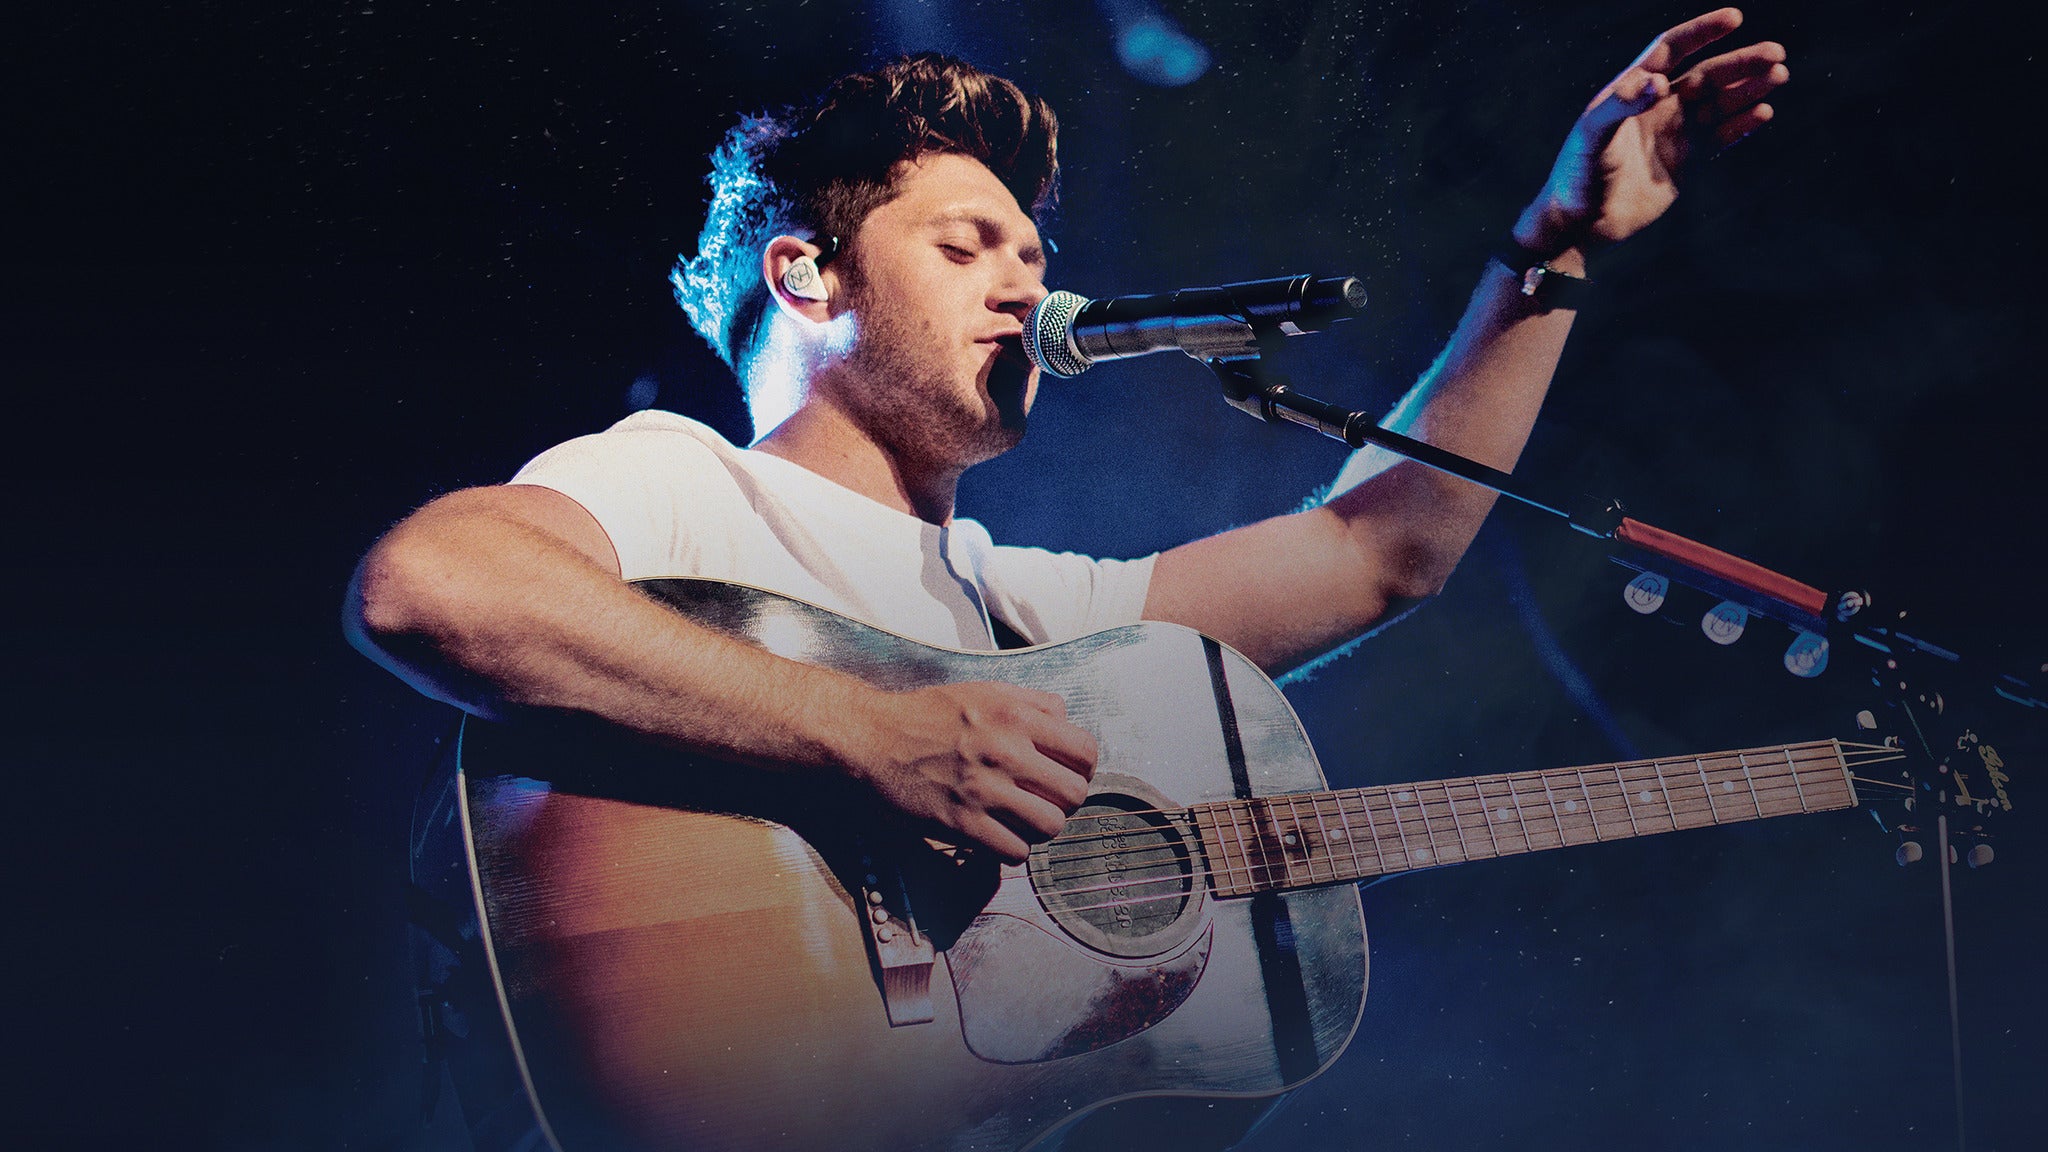 Honda Civic Tour presents Niall Horan, Nice To Meet Ya in Milwaukee  promo photo for Live Nation Mobile App presale offer code